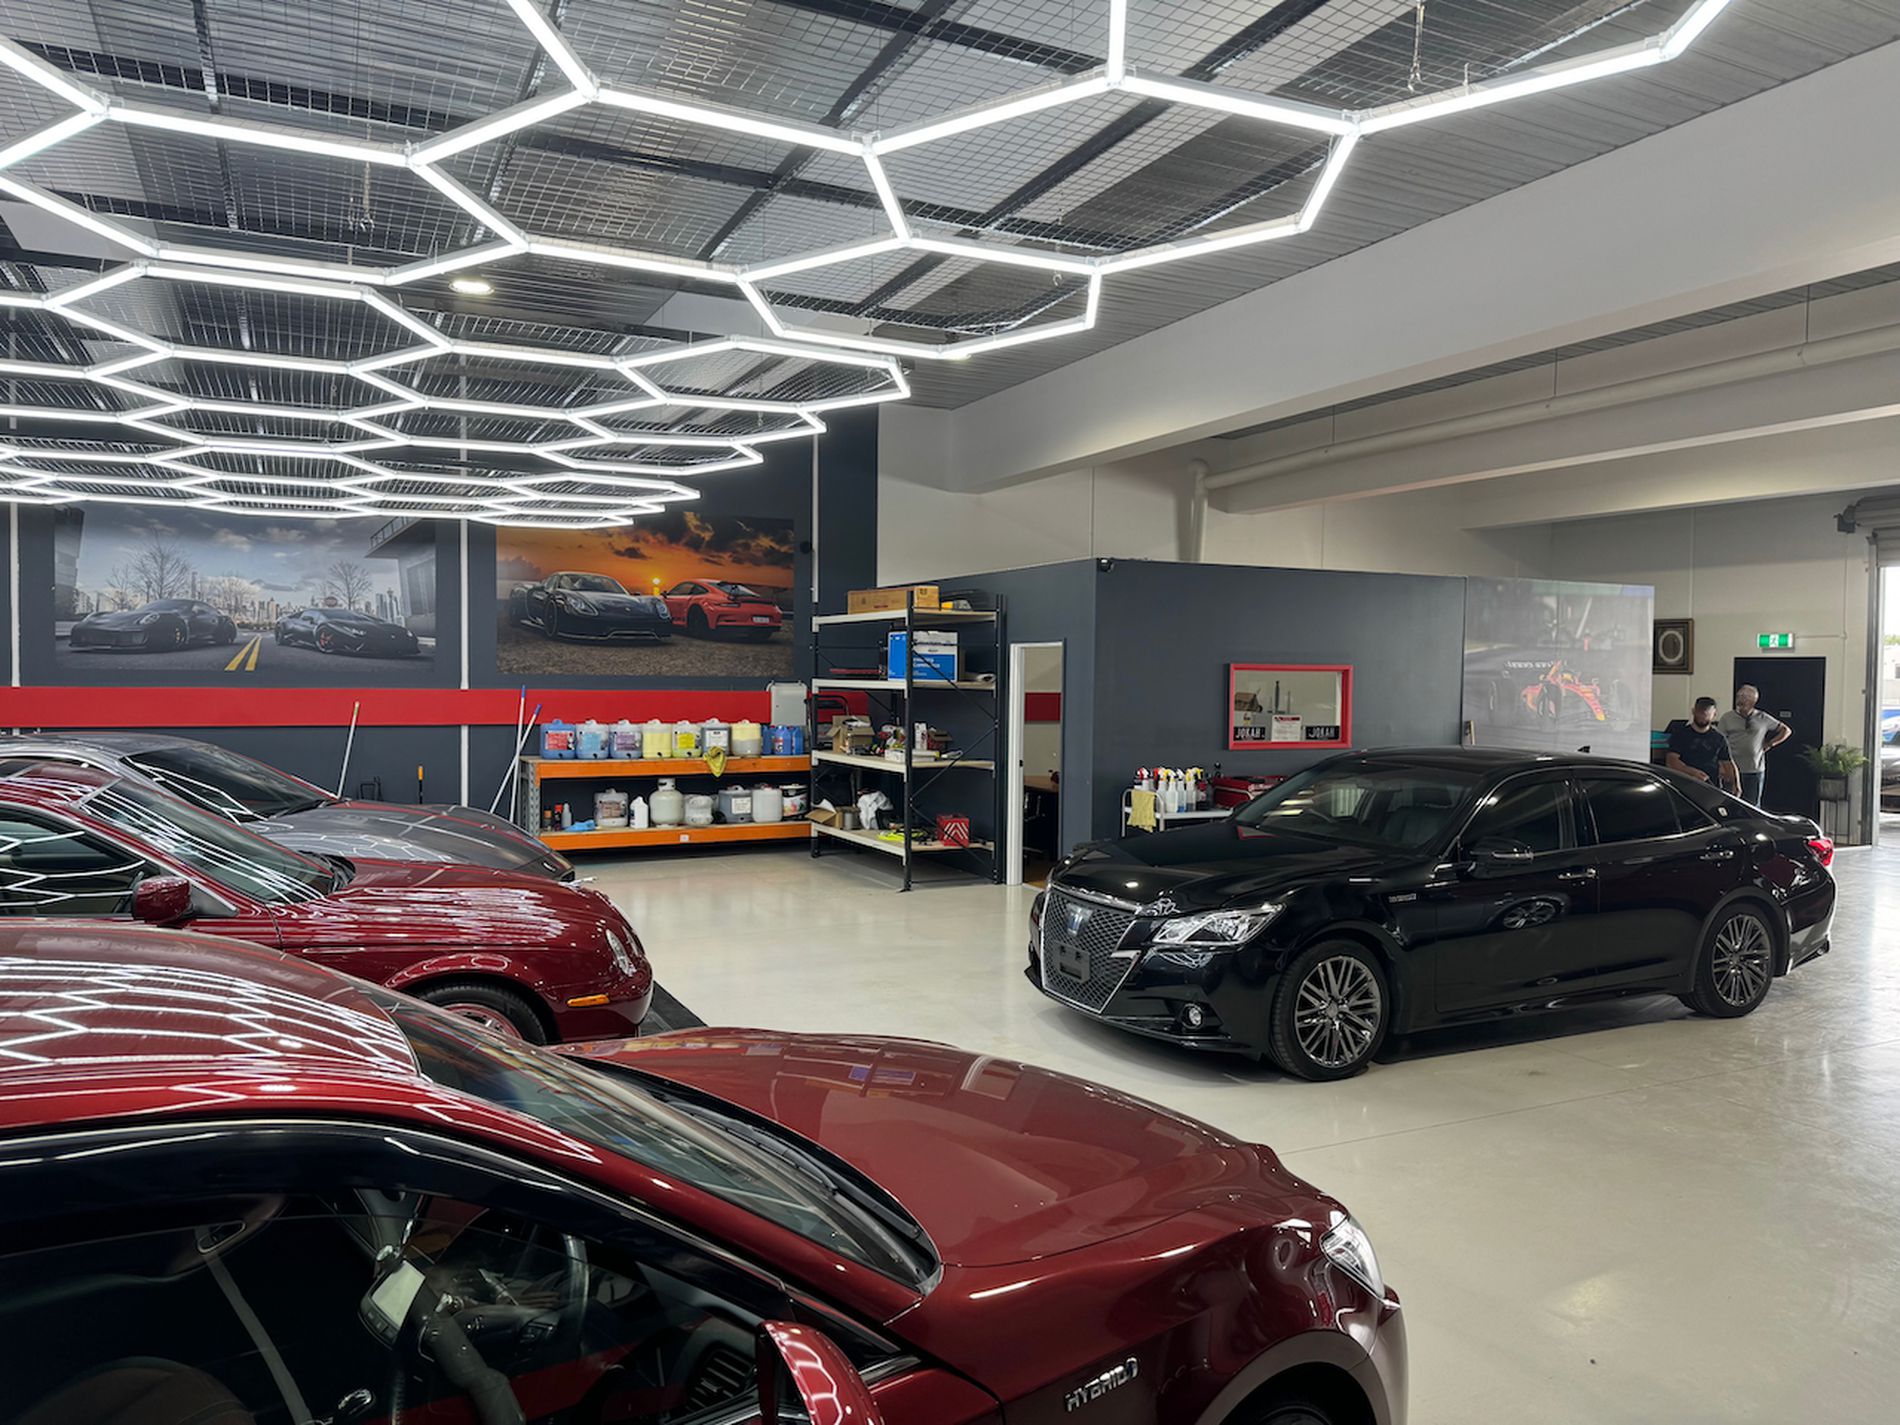 Brand New Car Wash and Vehicle Detailing Centre Business for Sale